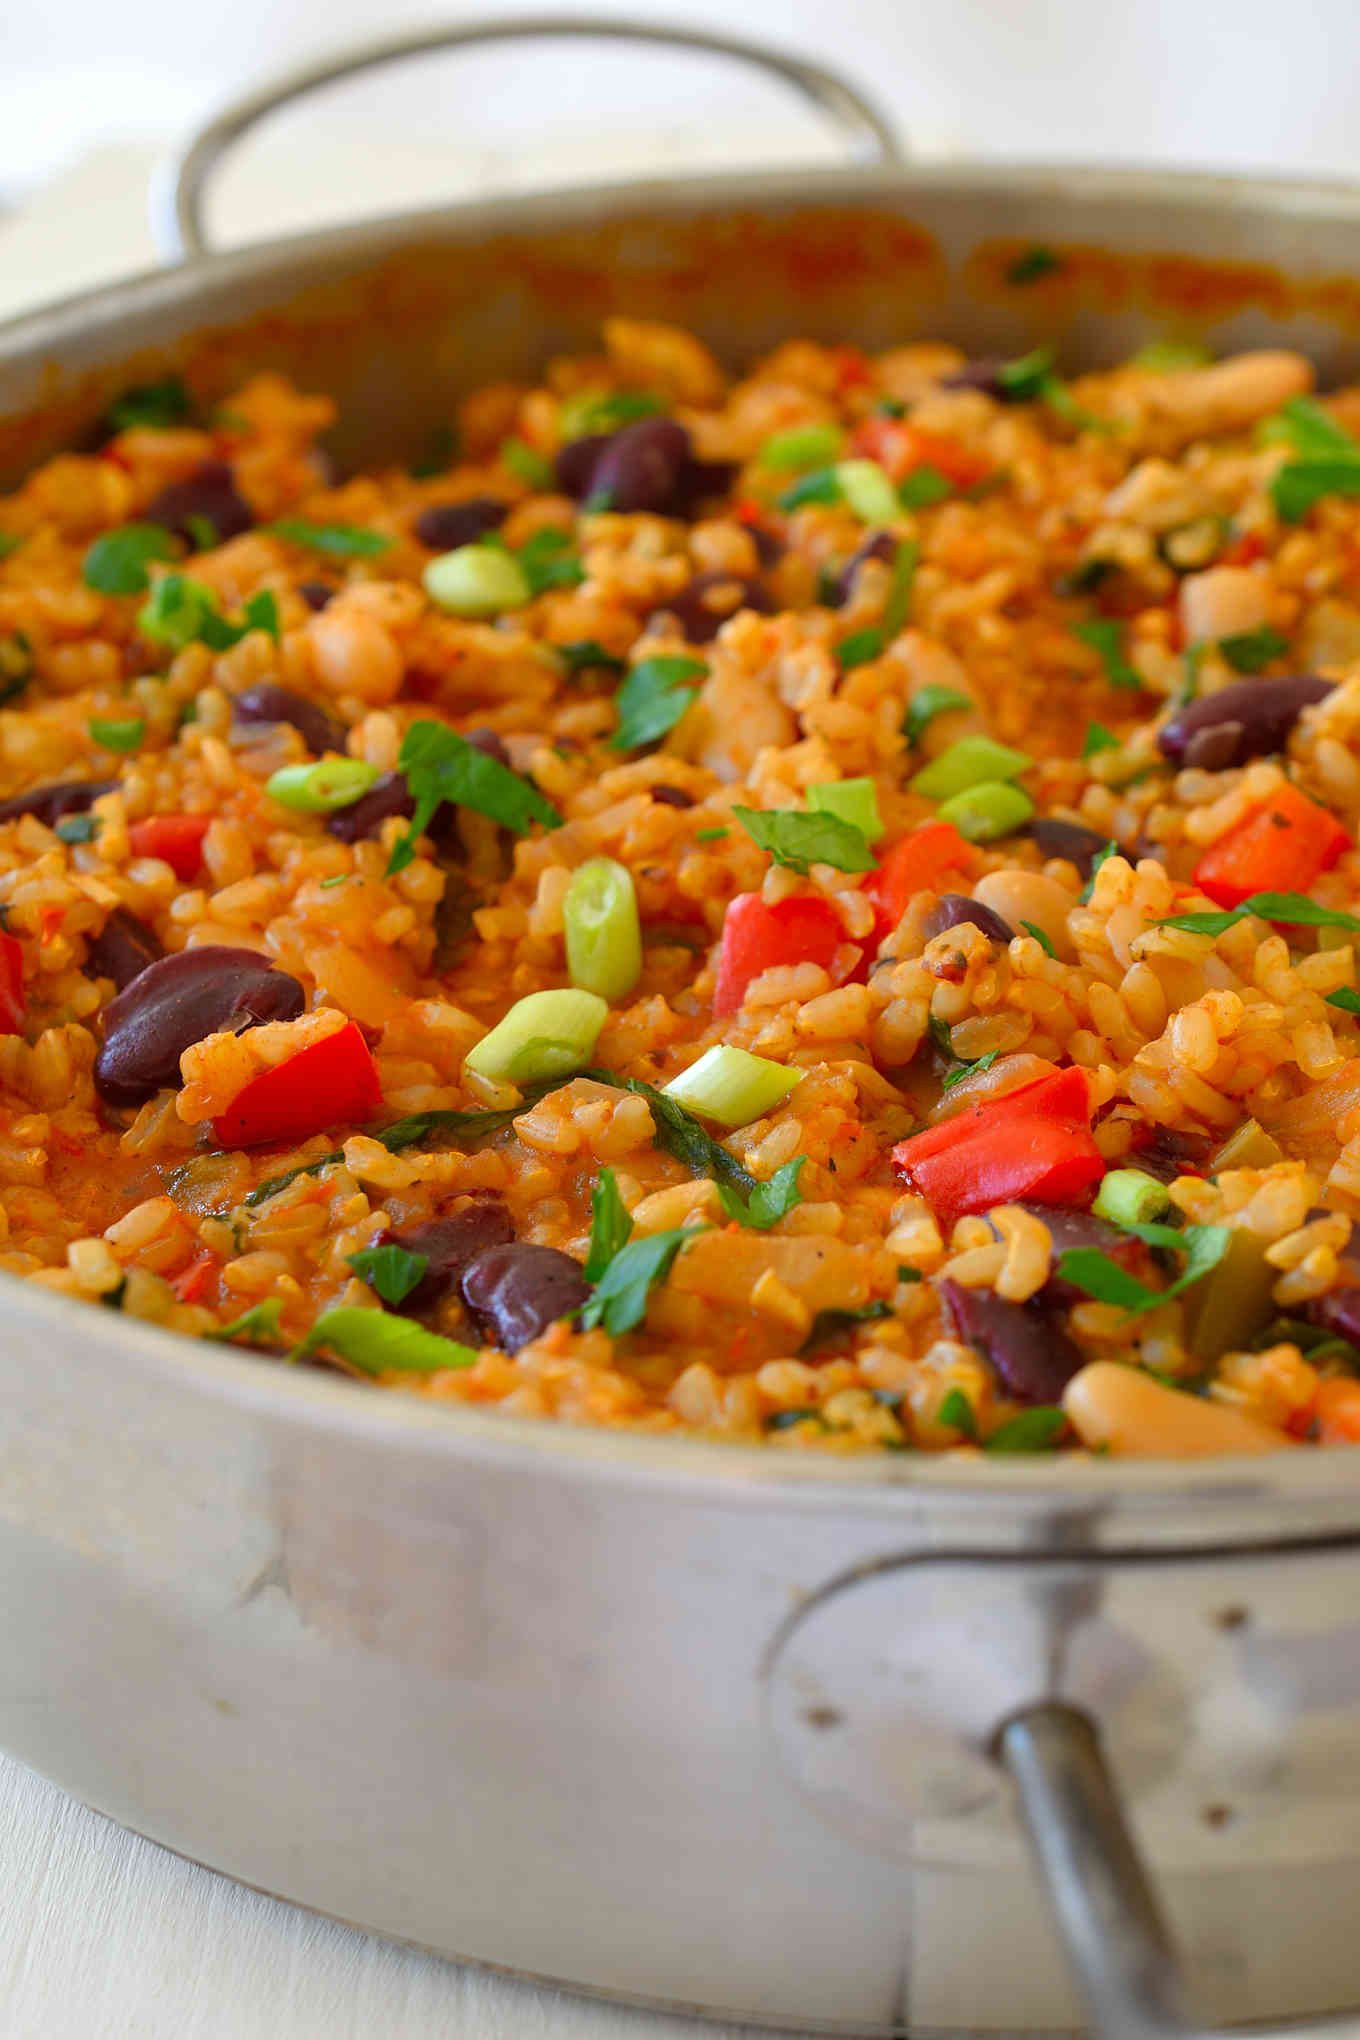 This vegan jambalaya recipe is super easy to make with basic pantry staples. Tomato-y rice flavoured with loads of herbs and spices and bulked up with celery, peppers and a selection of mixed beans make a hearty, warming and filling quick weeknight lunch or dinner.